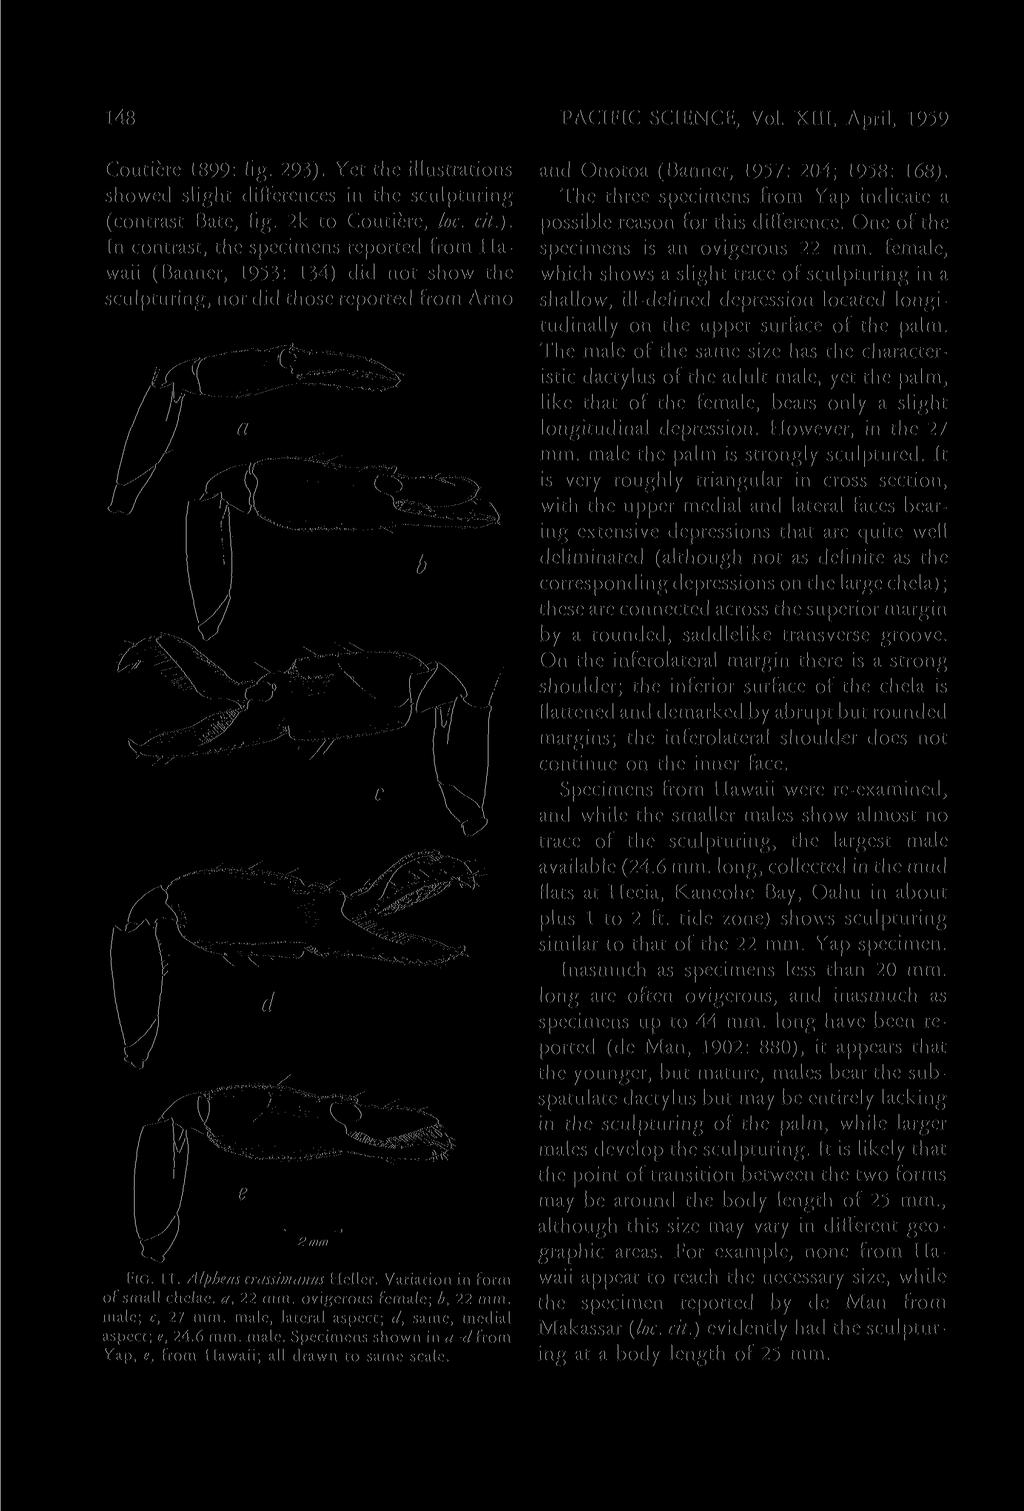 .148 PACIFIC SCIENCE, Vol. XIII, April, 1959 Coutiere 1899: fig. 293). Yet the illustrations showed slight differences in the sculpturing (contrast Bate, fig. 2k to Coutiere, loc. cit.). In contrast, the specimens reported from Hawaii (Banner, 1953: 1.